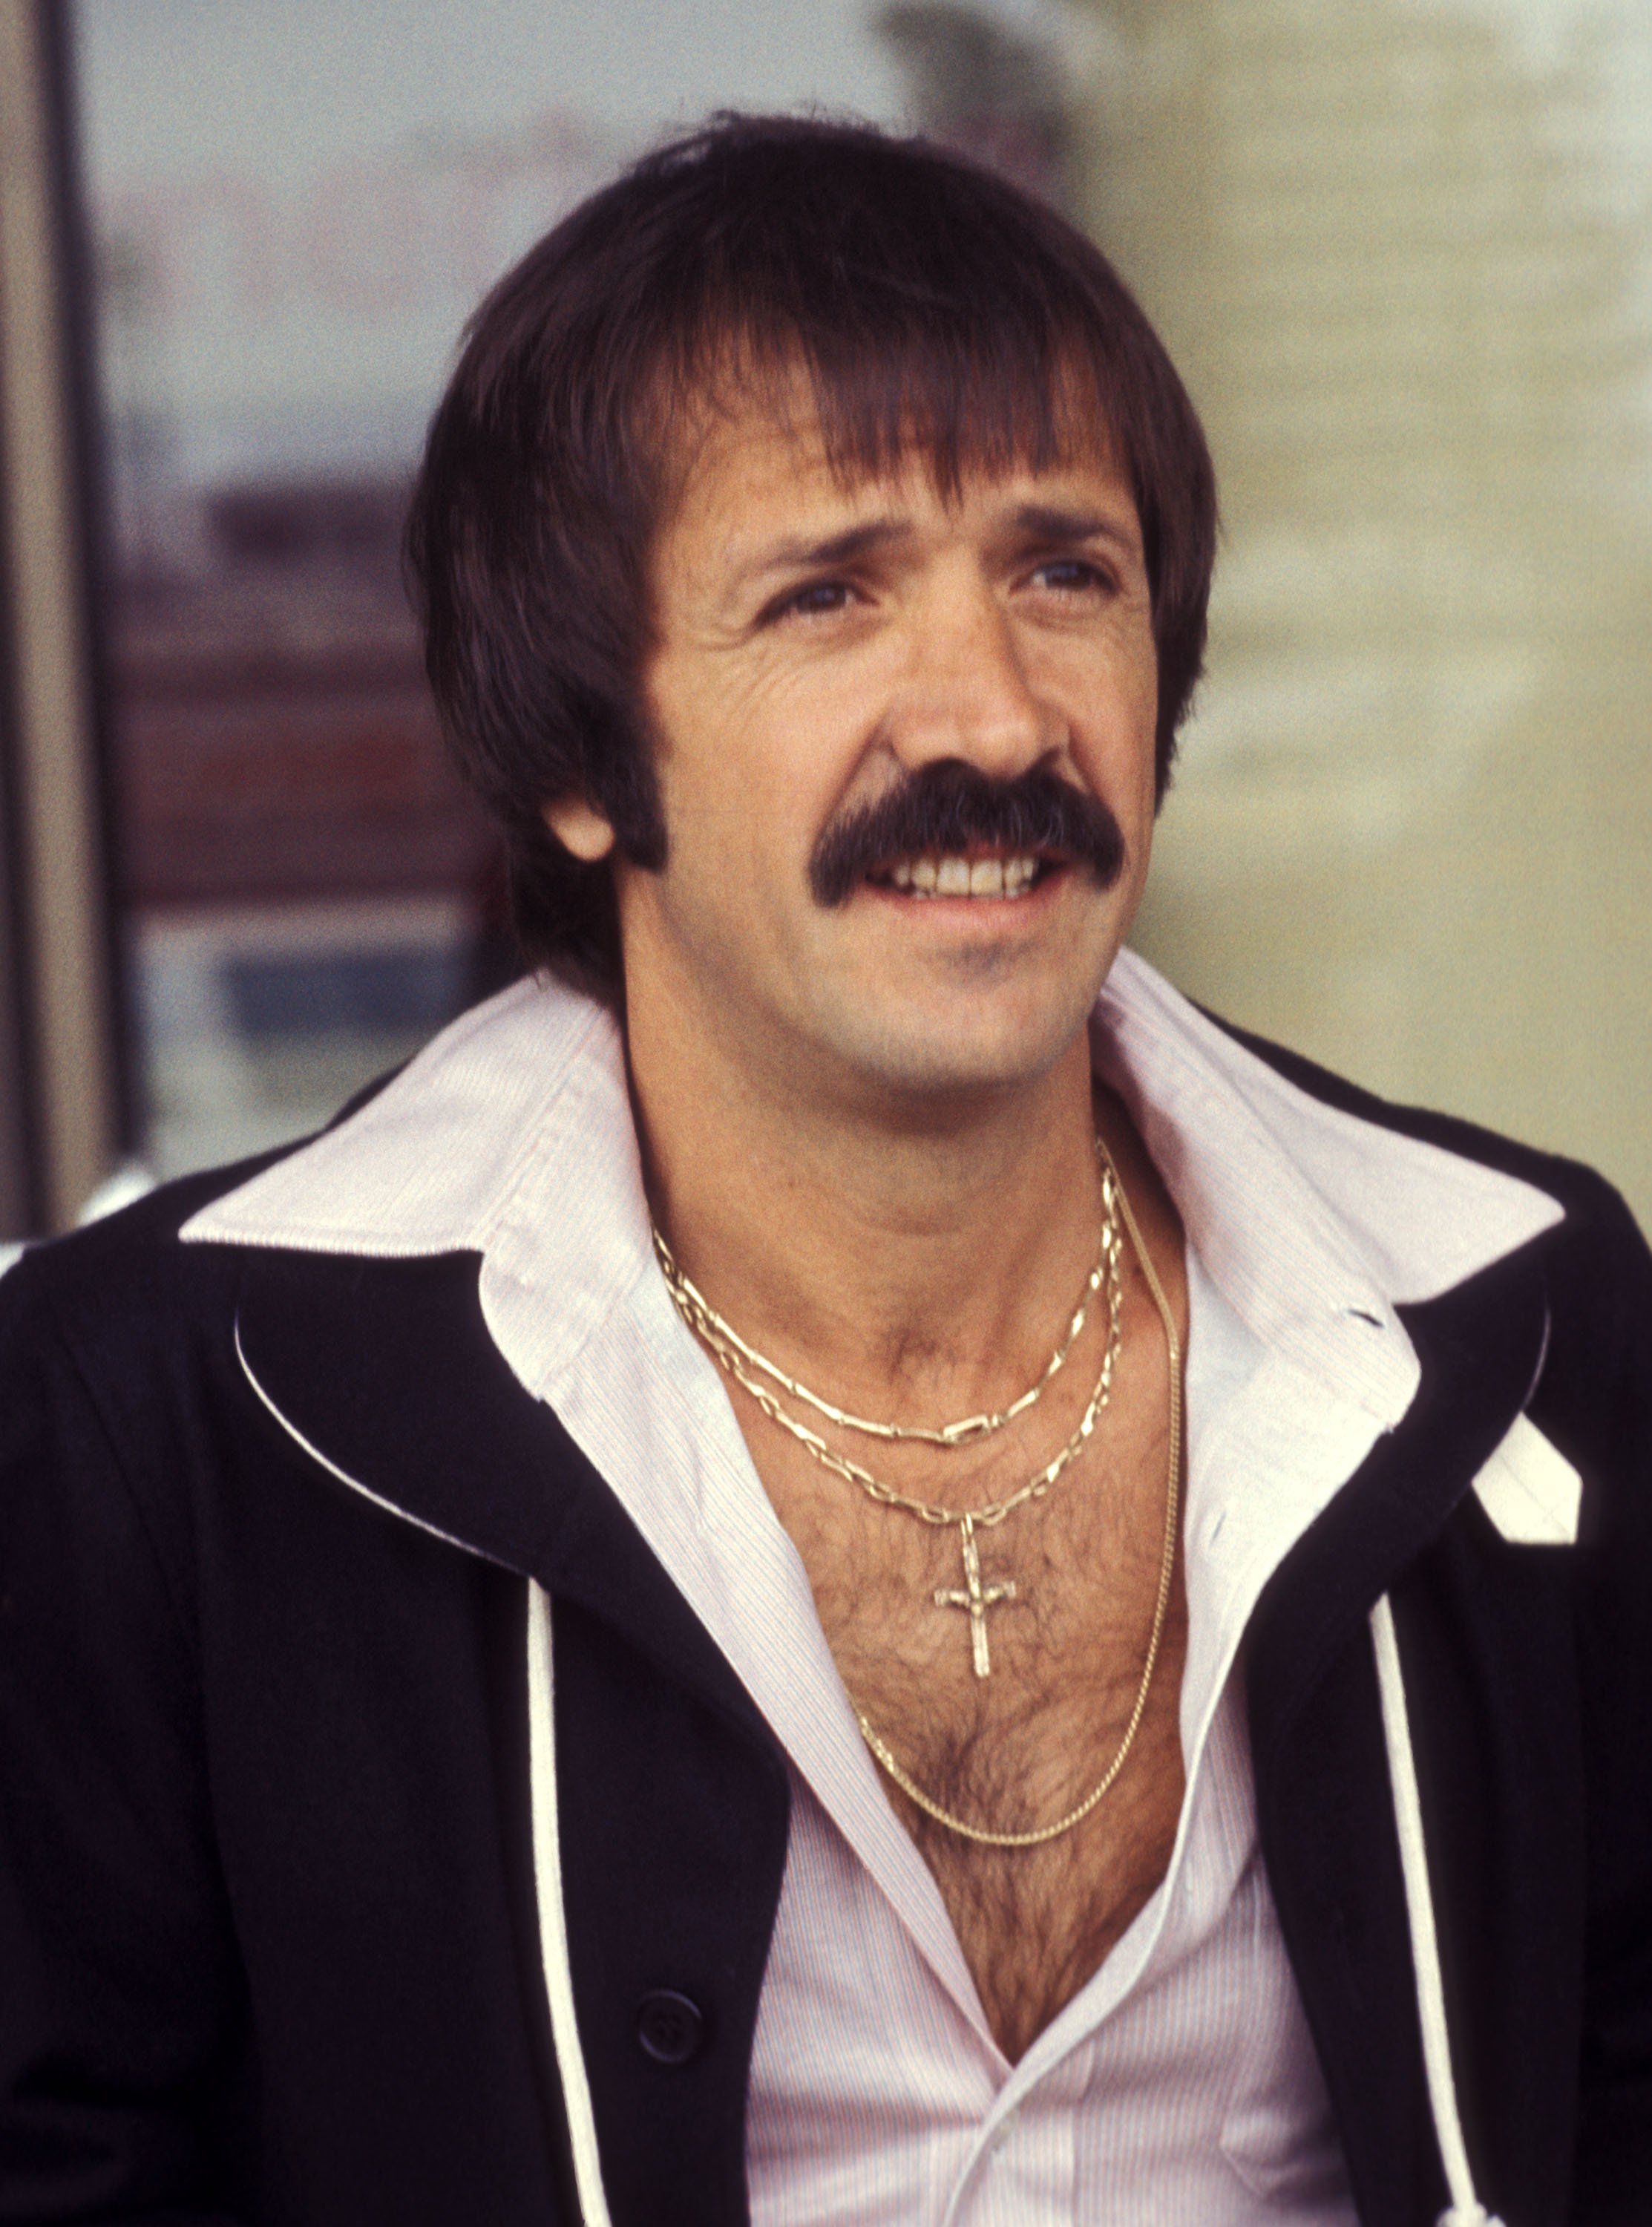 Singer Sonny Bono arrives at the Los Angeles International Airport in Los Angeles, California on June 12, 1977  | Source: Getty Images